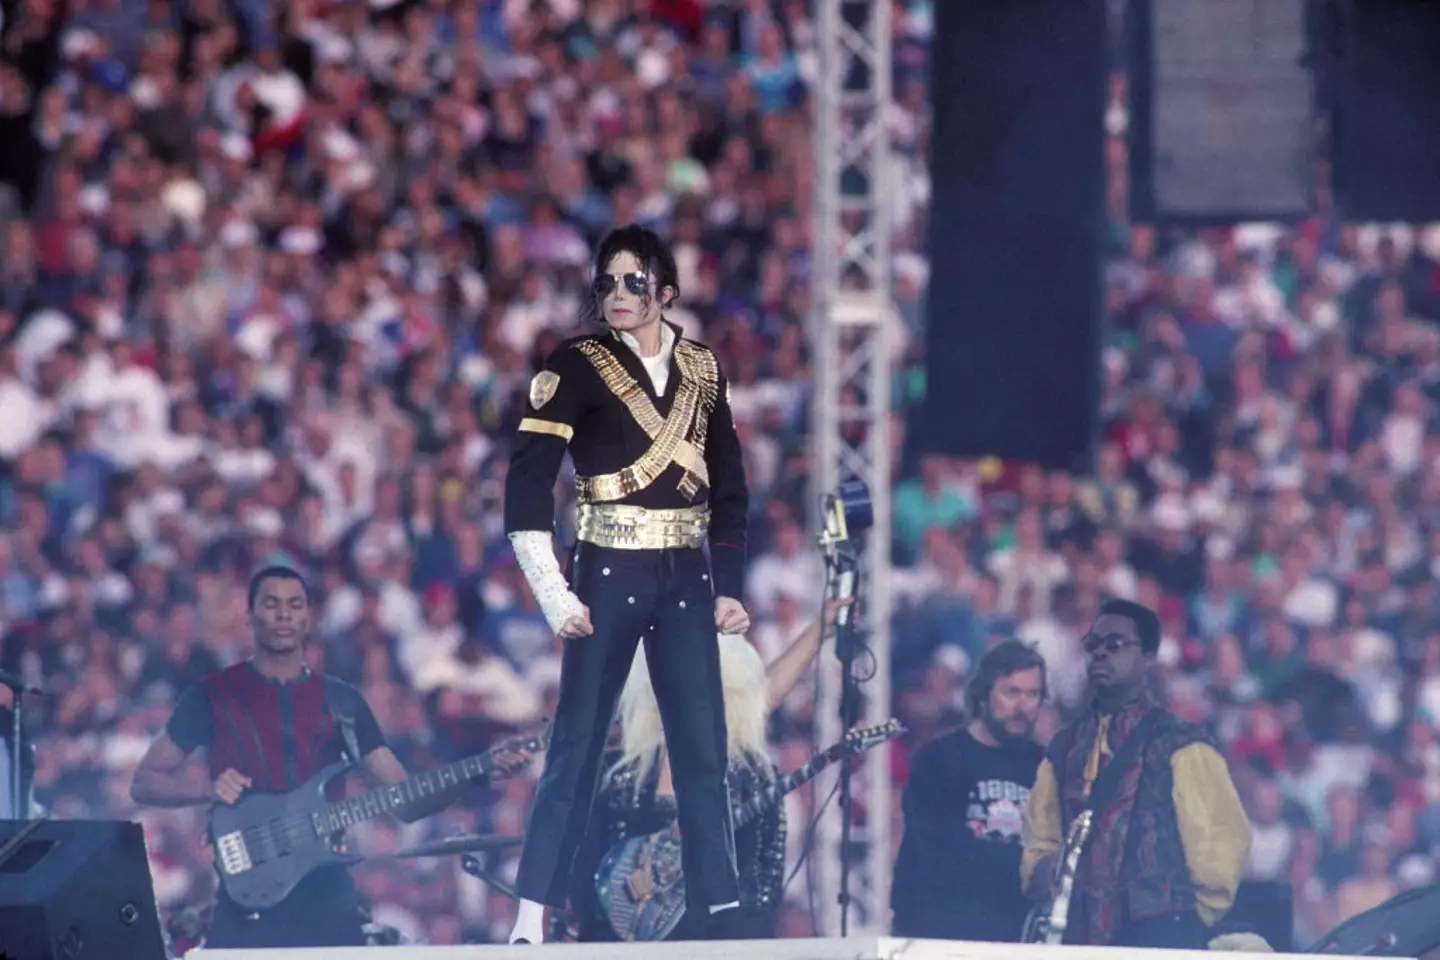 Michael Jackson performs during halftime of Super Bowl 1993.